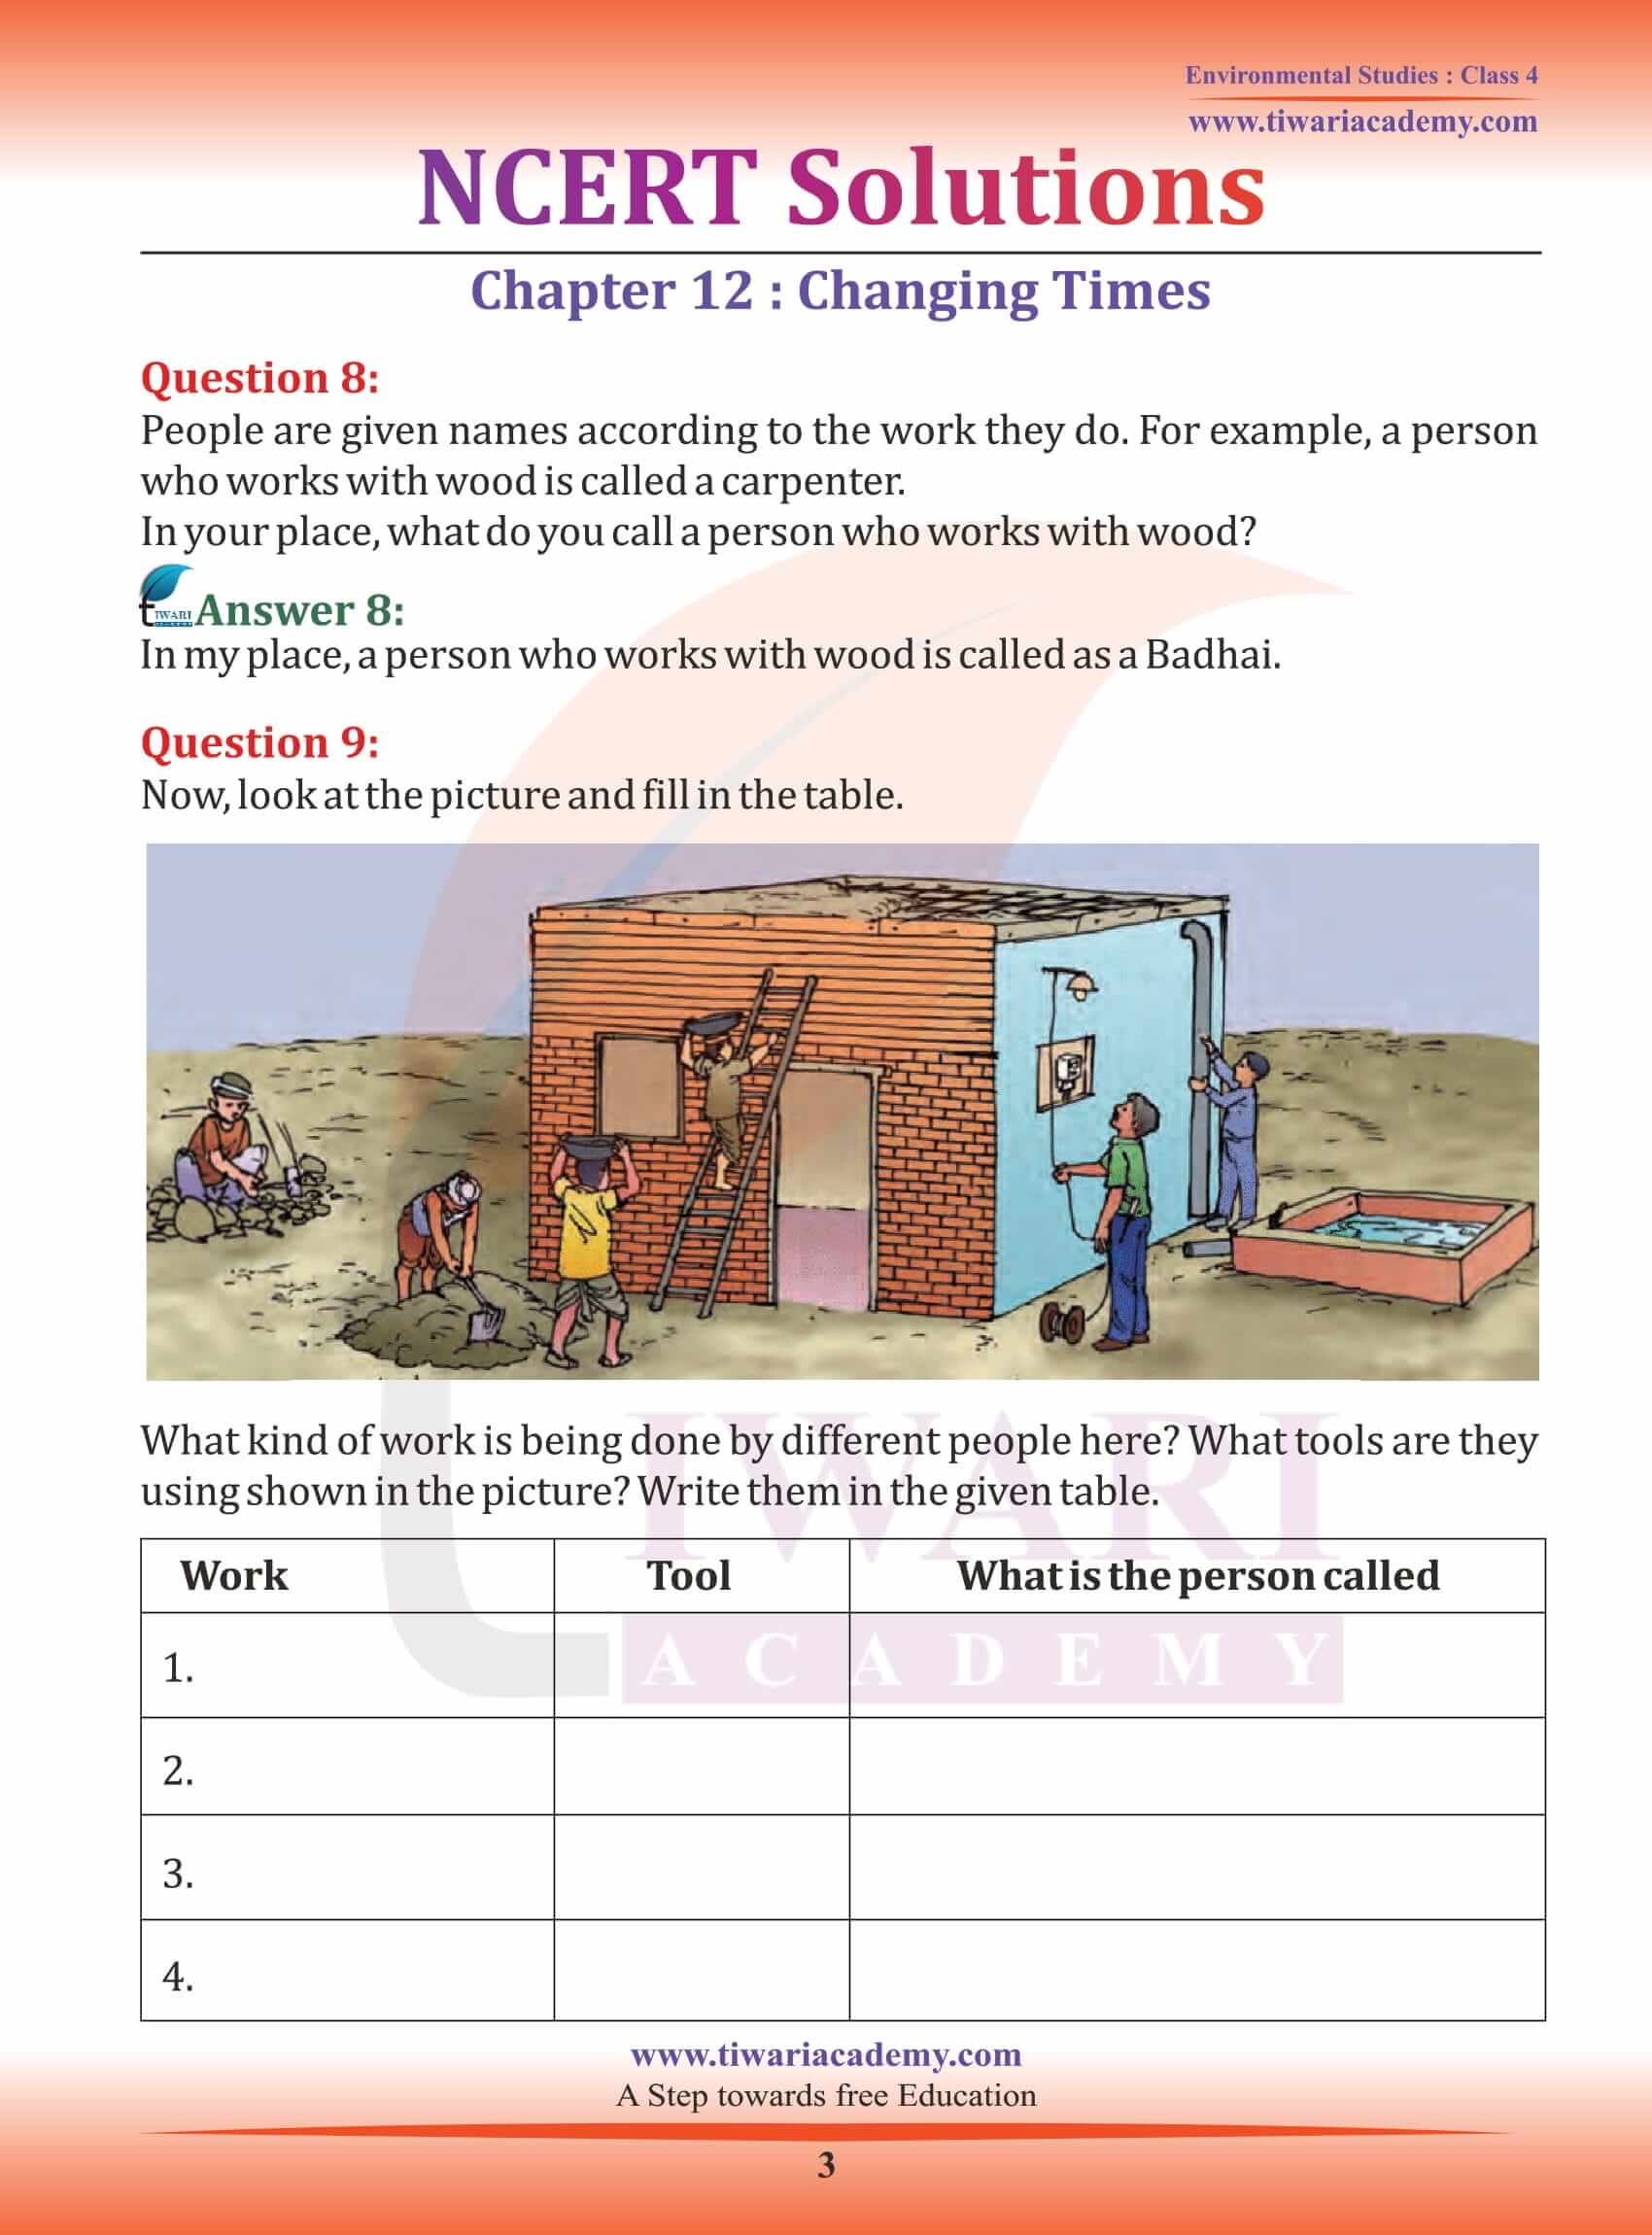 NCERT Solutions for Class 4 EVS Chapter 12